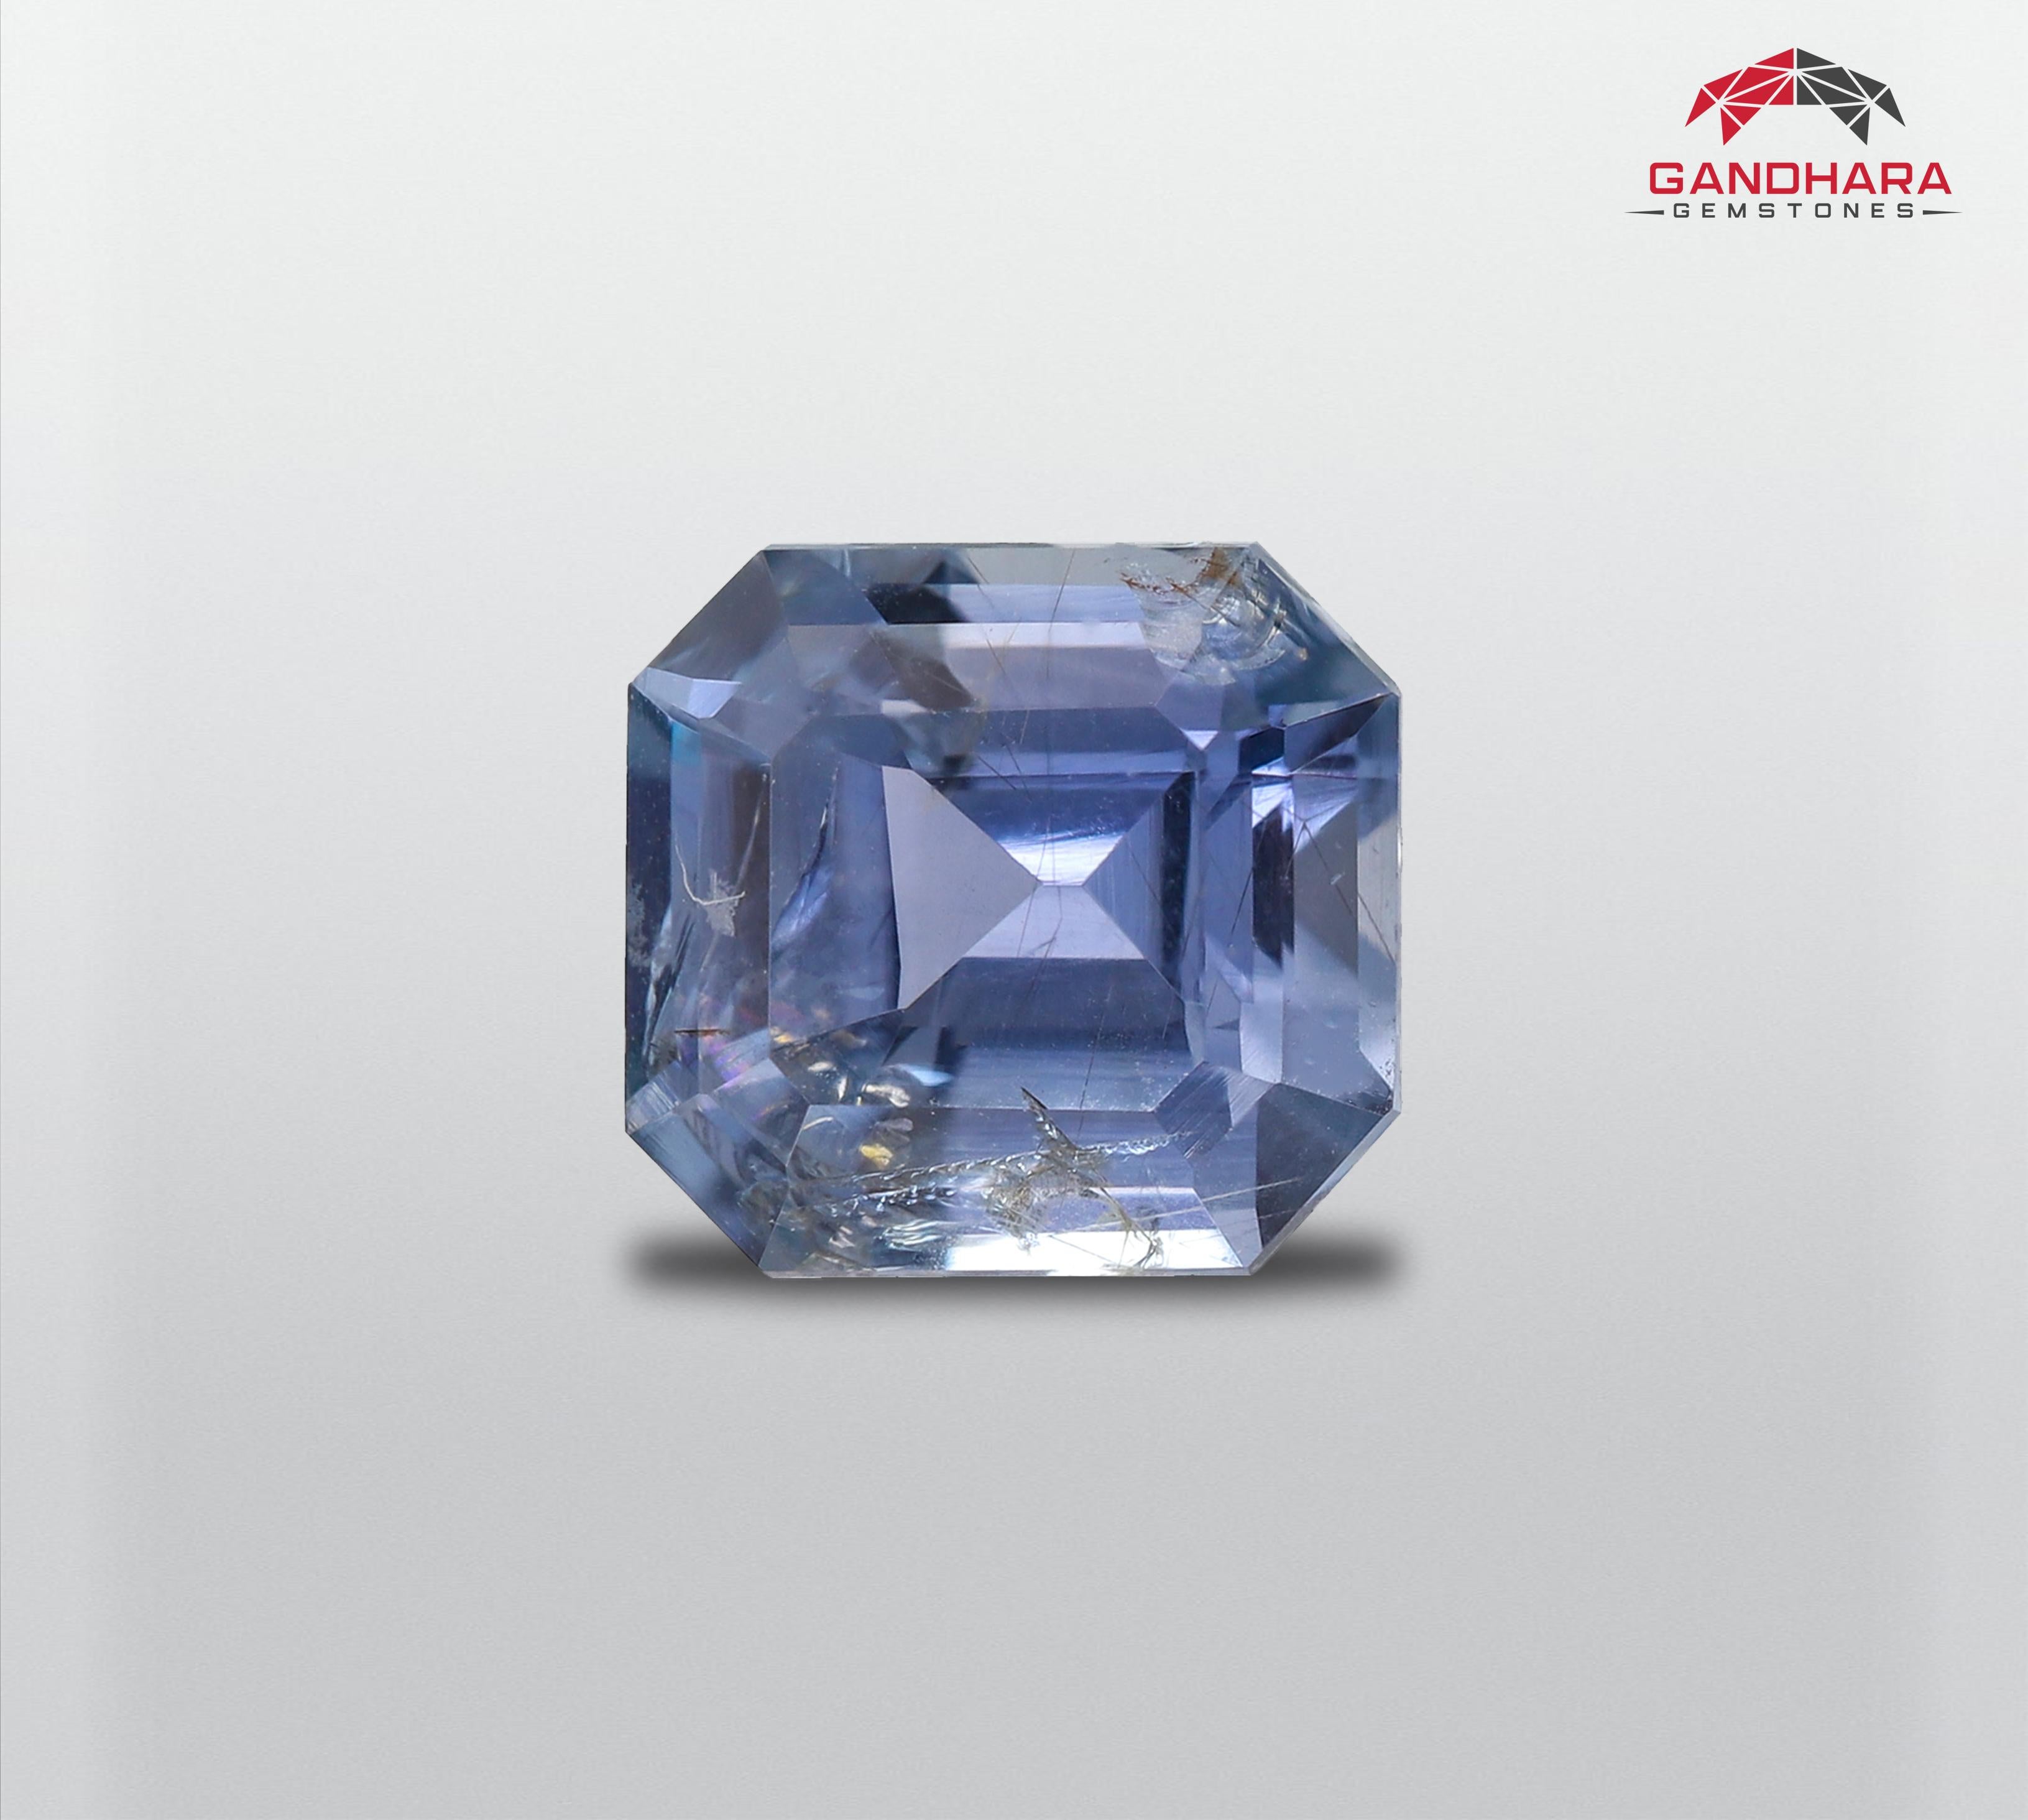 Fine Blue Sapphire Gemstone, available for sale, natural high-quality flawless, 0.79 carats, faceted emerald cut certified loose gemstone from Sri lanka.

Product Information:
GEMSTONE TYPE	Fine Blue Sapphire Gemstone
WEIGHT	0.79